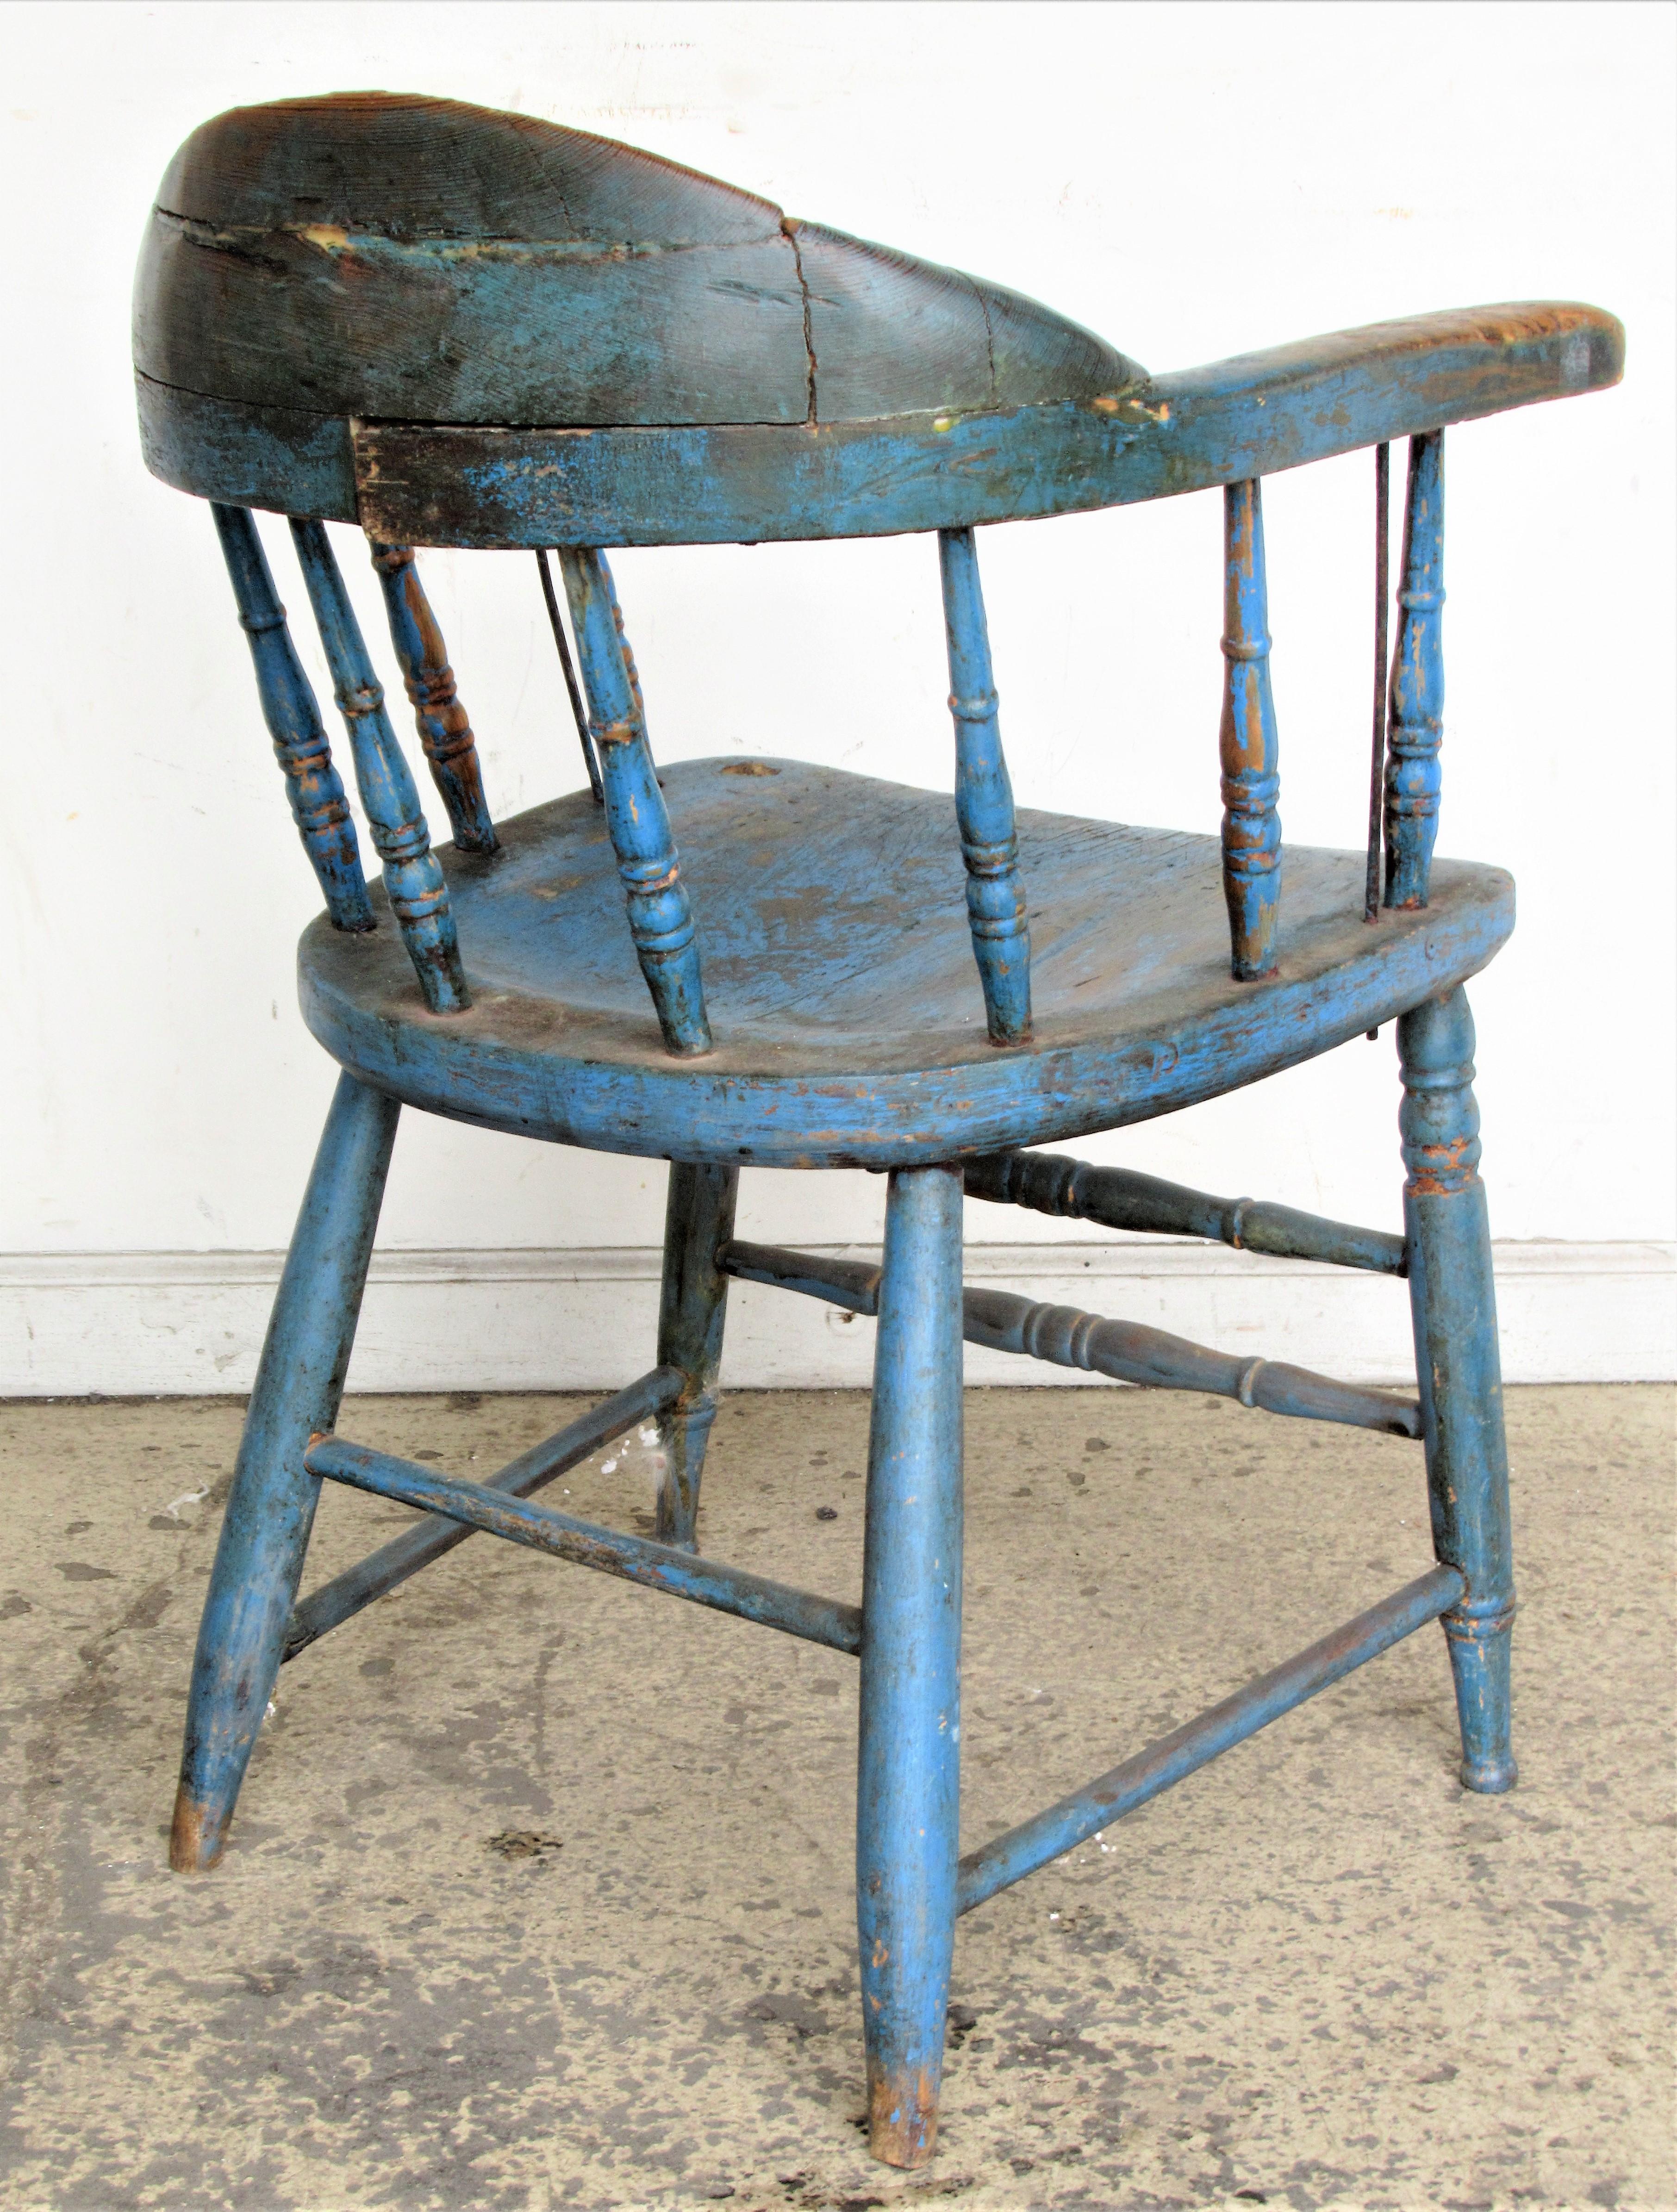 Antique American Firehouse Windsor Chair in Old Blue Paint 5